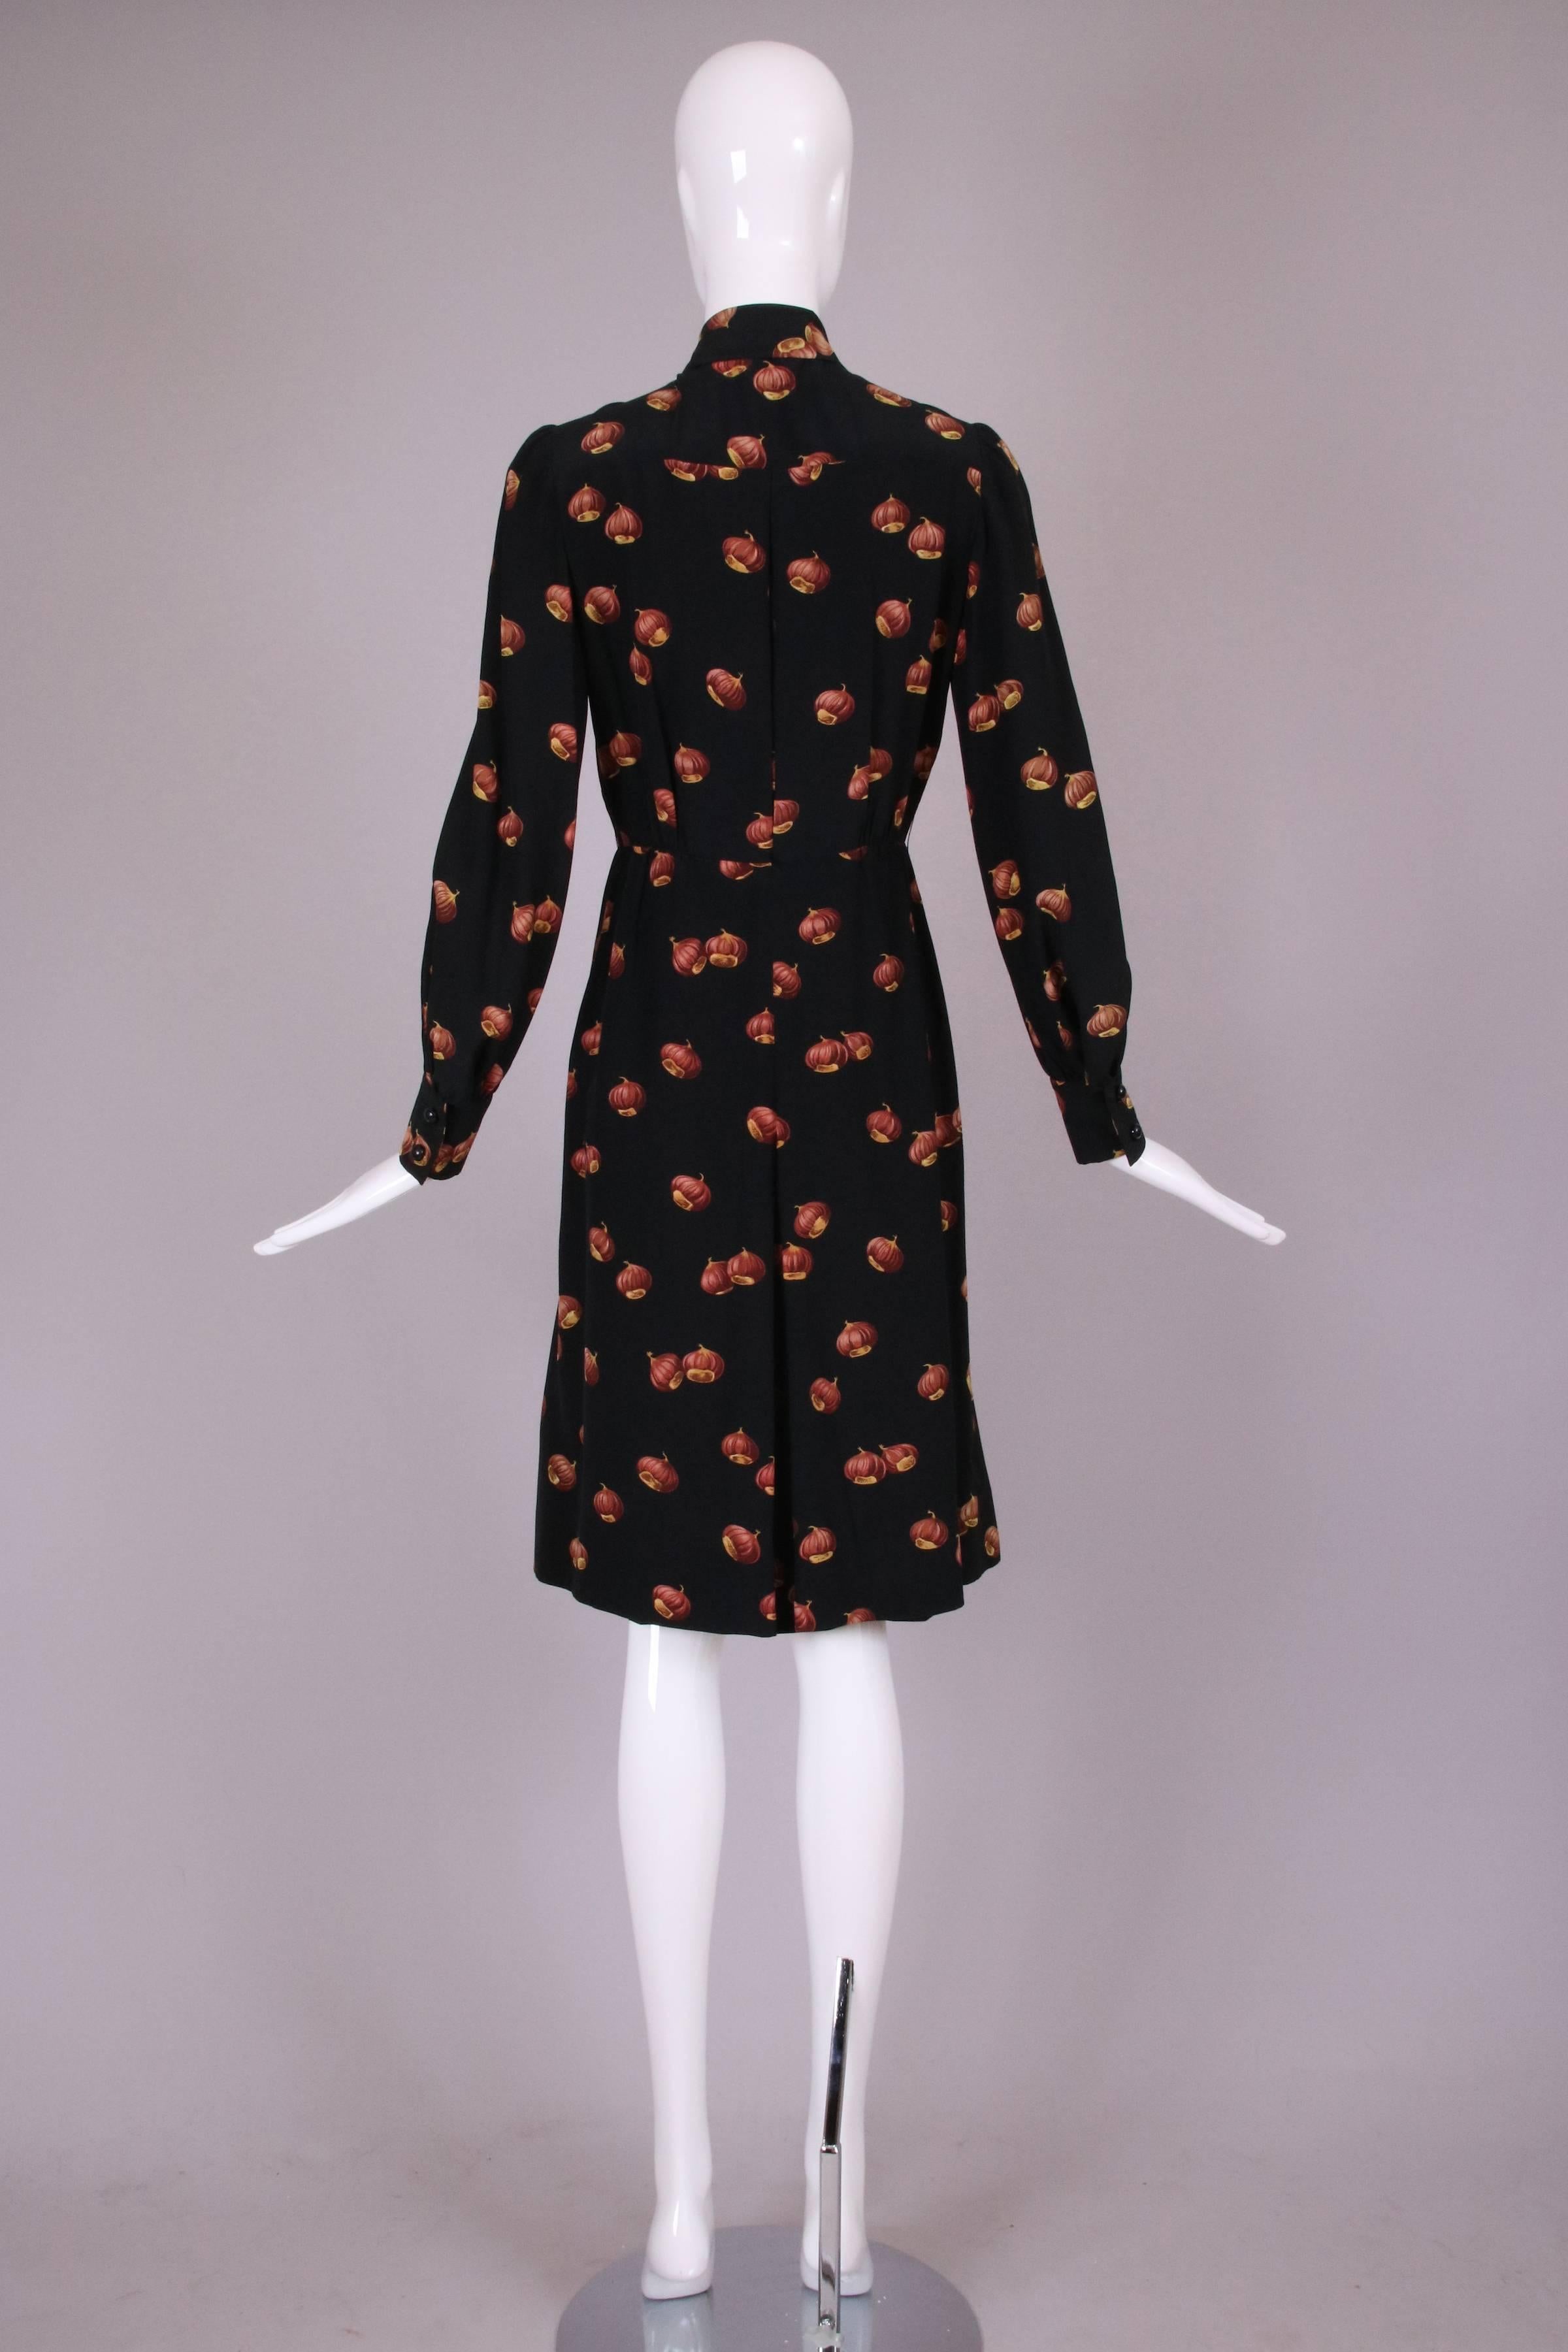 1970's Valentino silk day dress with chestnut print throughout. This dress has a box pleat button placket down center front and two inverted pleats on the skirt. A classic secretary dress. 

Measurements:
Bust - 38"   
Waist -